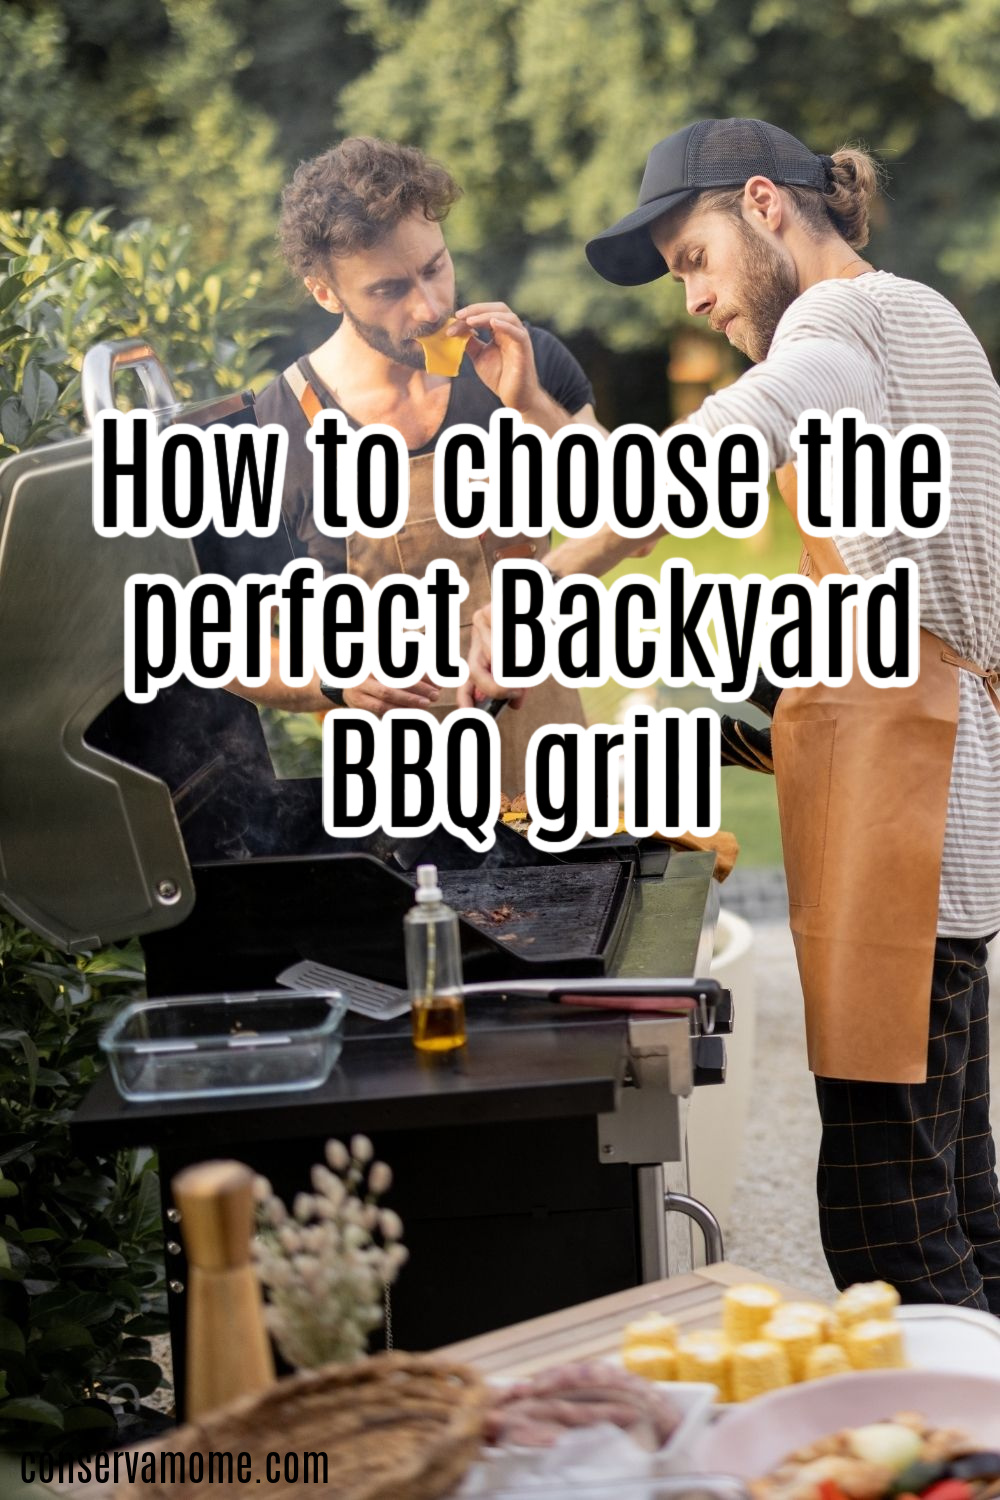 How to choose the perfect Backyard BBQ grill 